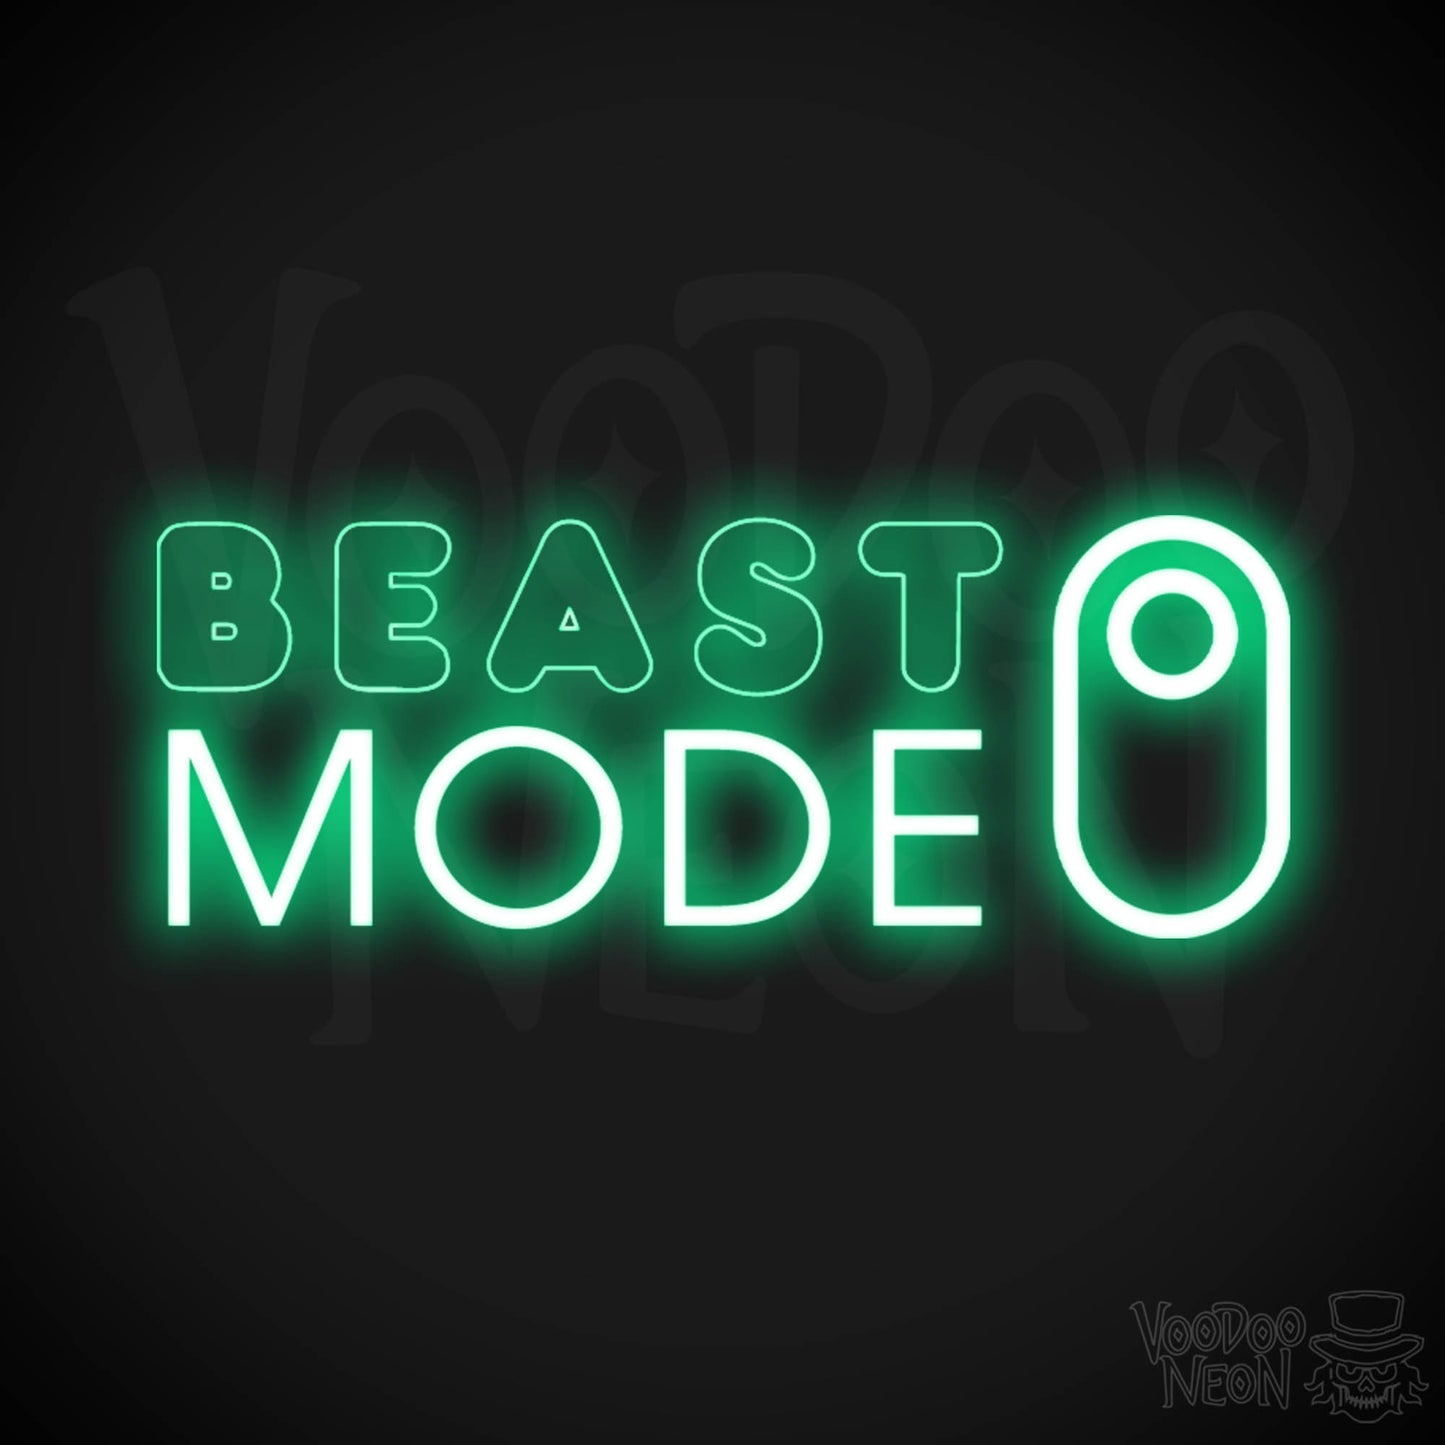 Beast Mode Neon Sign - Neon Beast Mode Sign - LED Lights - Color Green